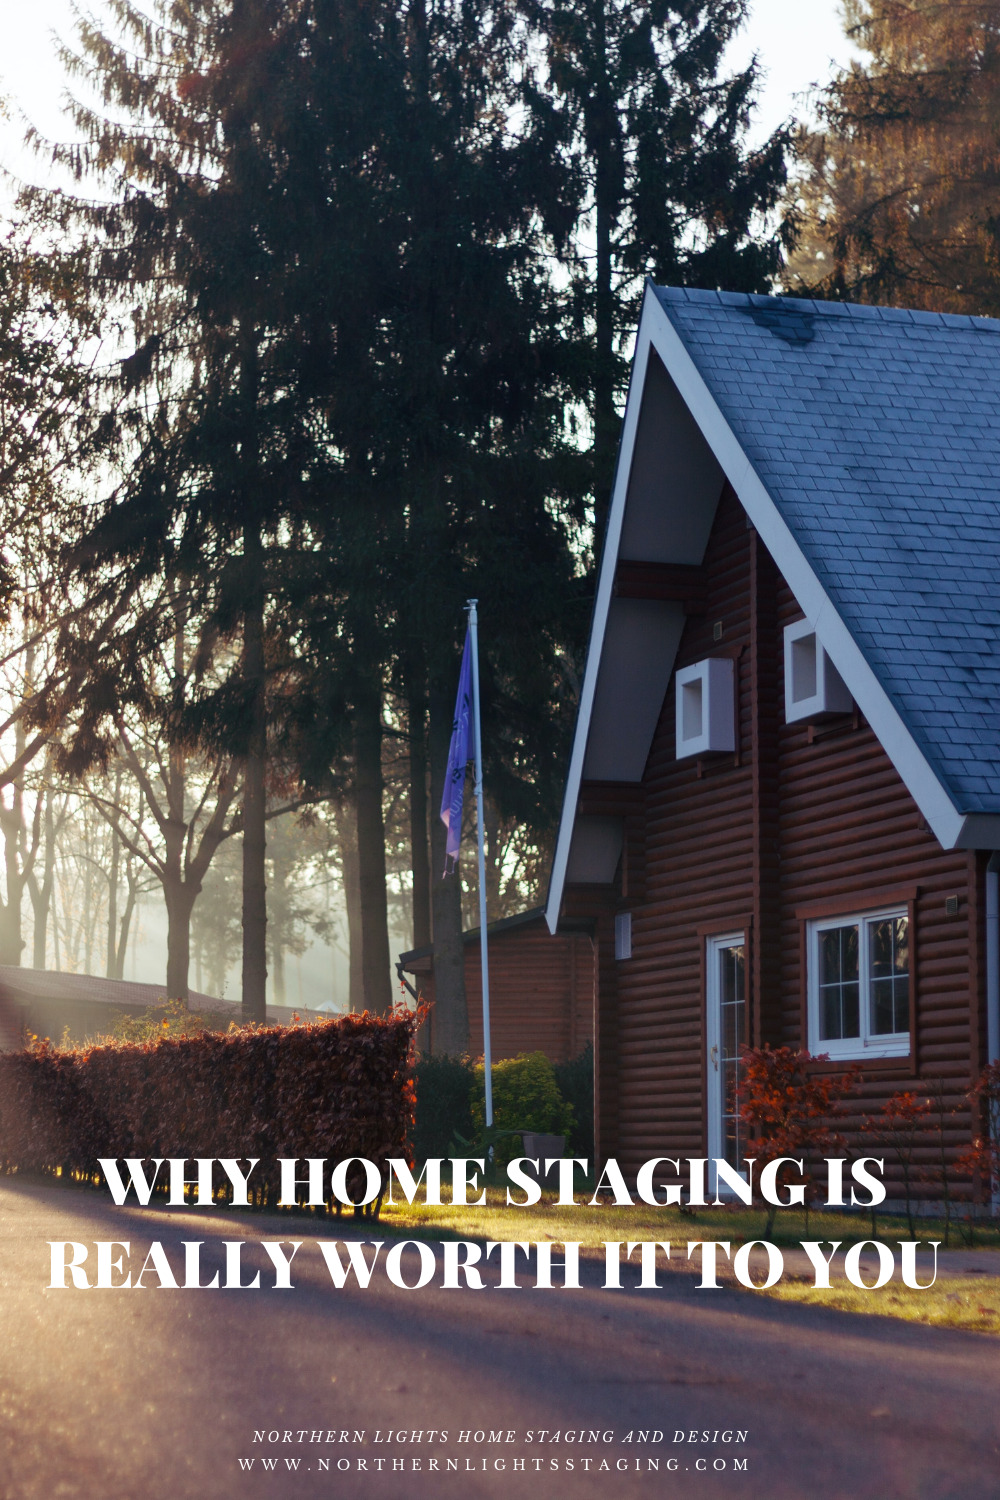 Why Home Staging is Really Worth it to You